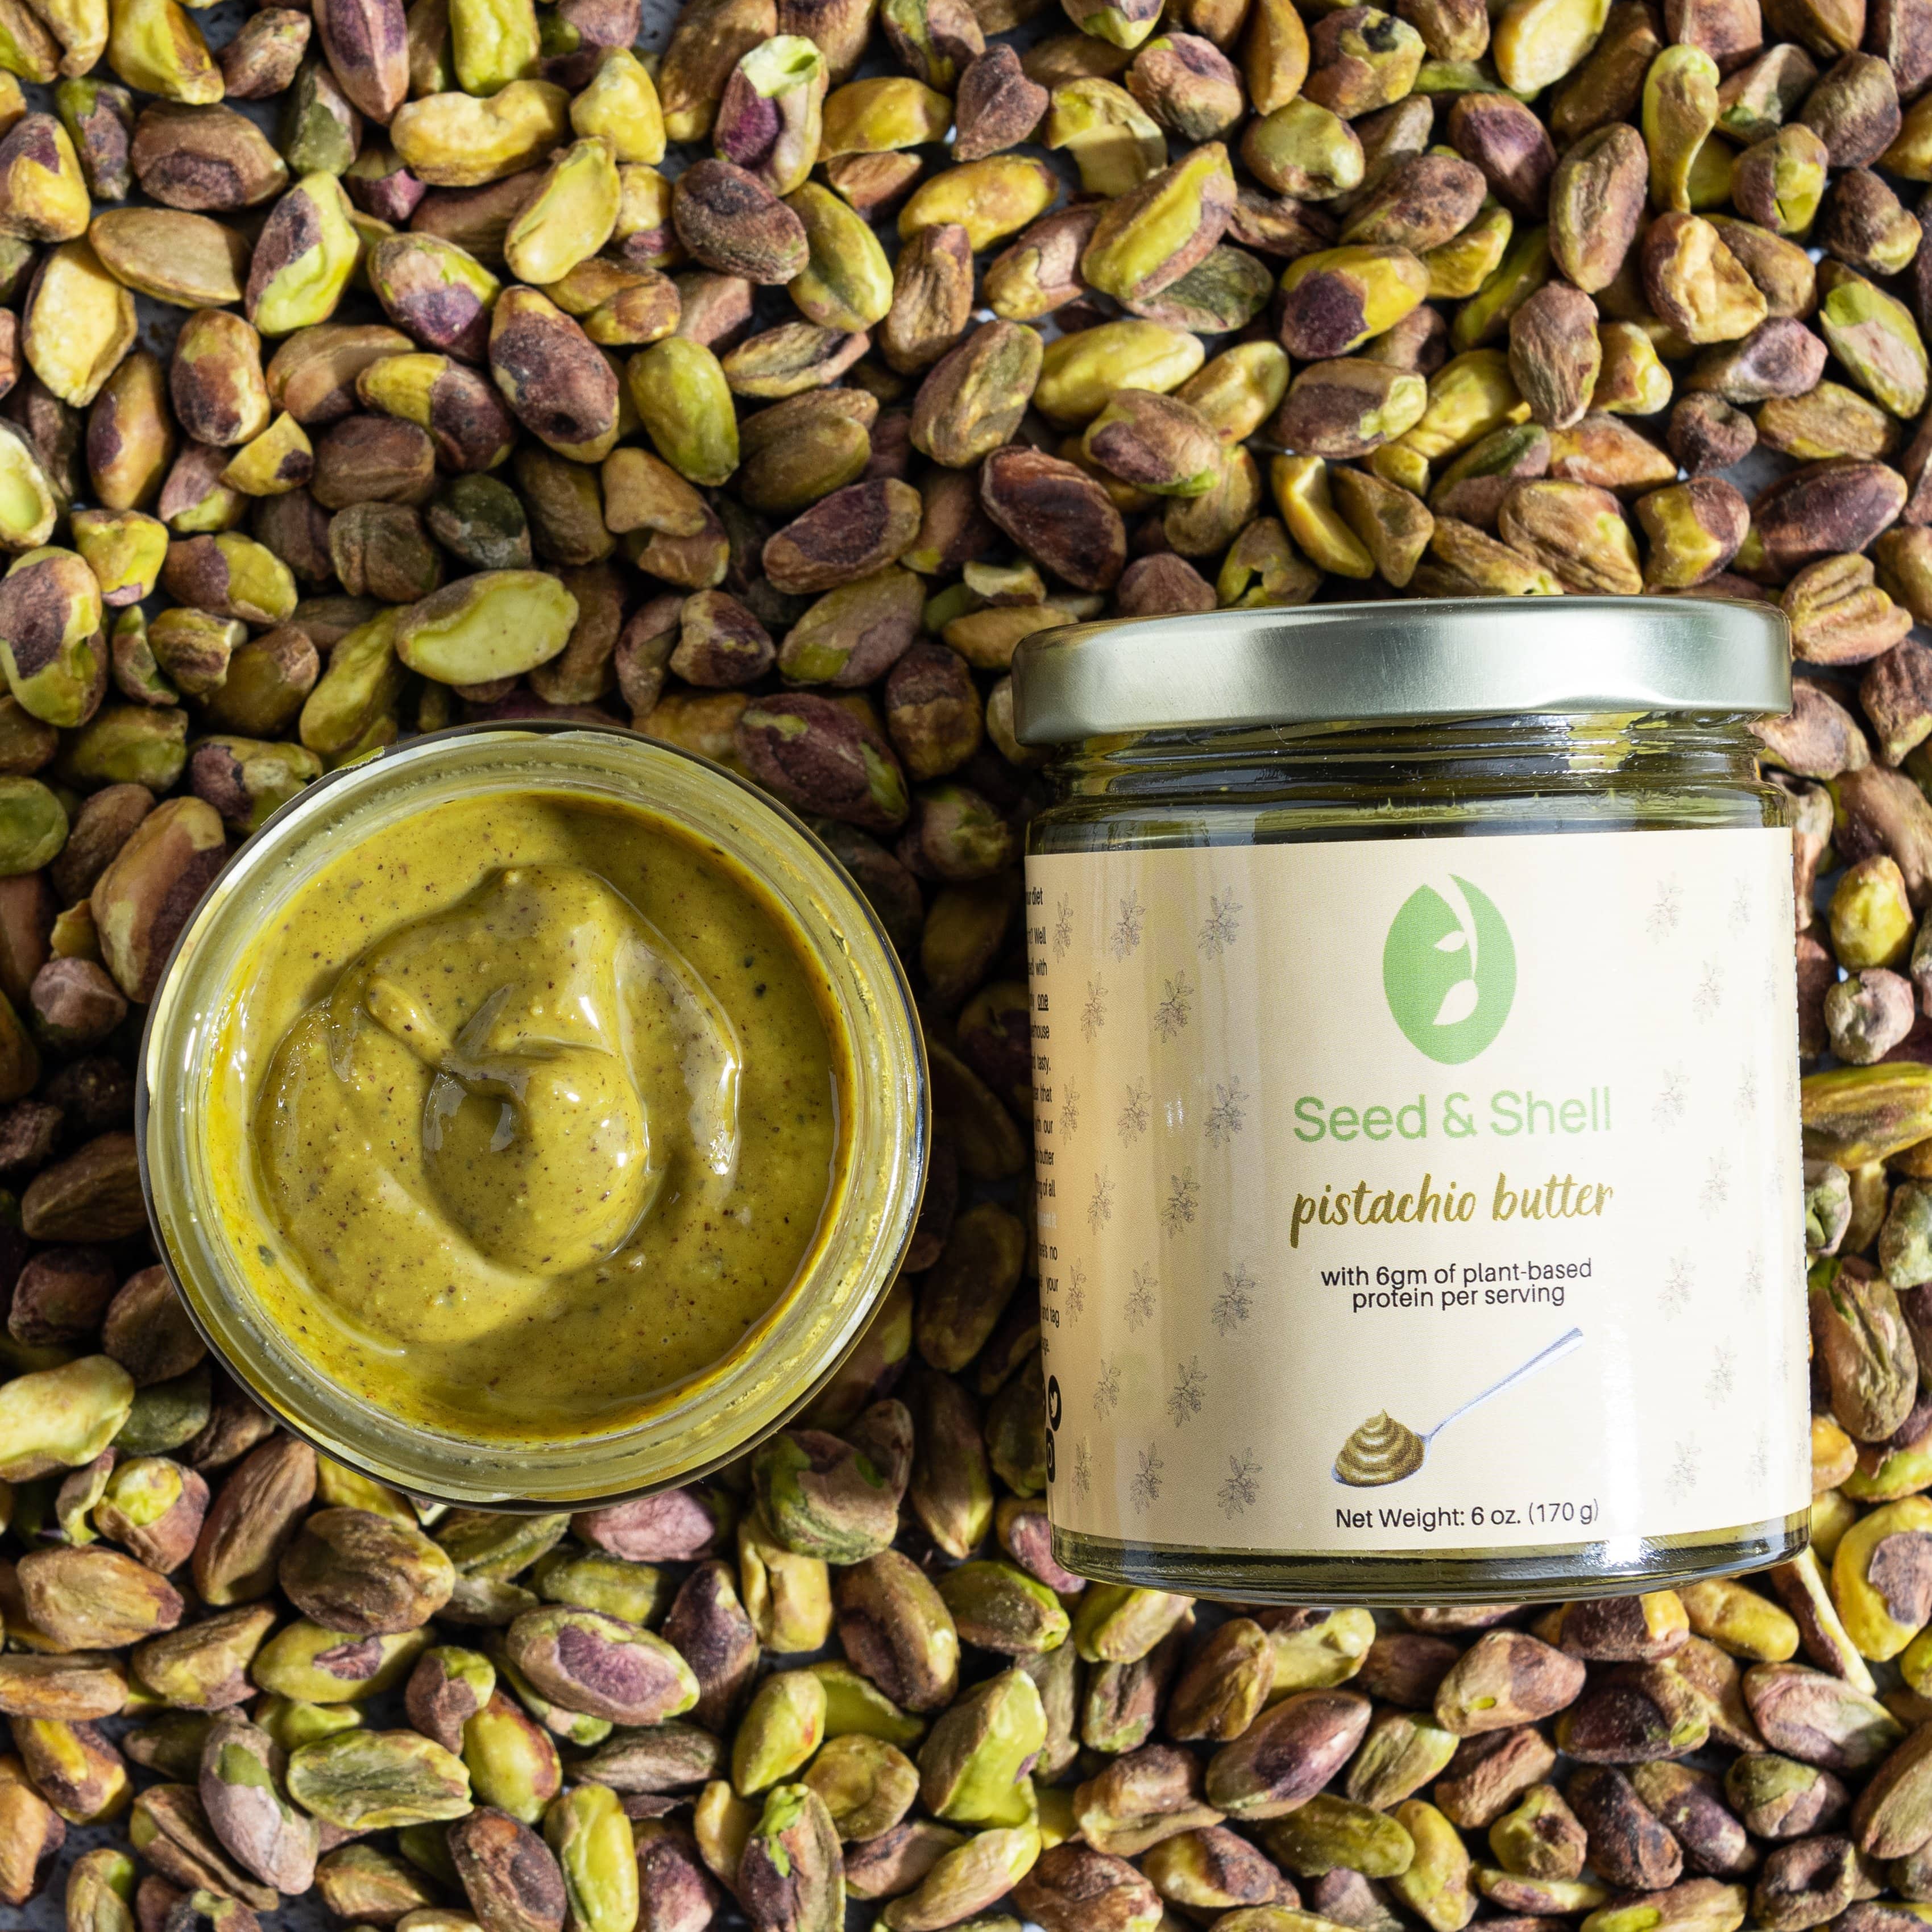 Seed & Shell Pistachio Butter